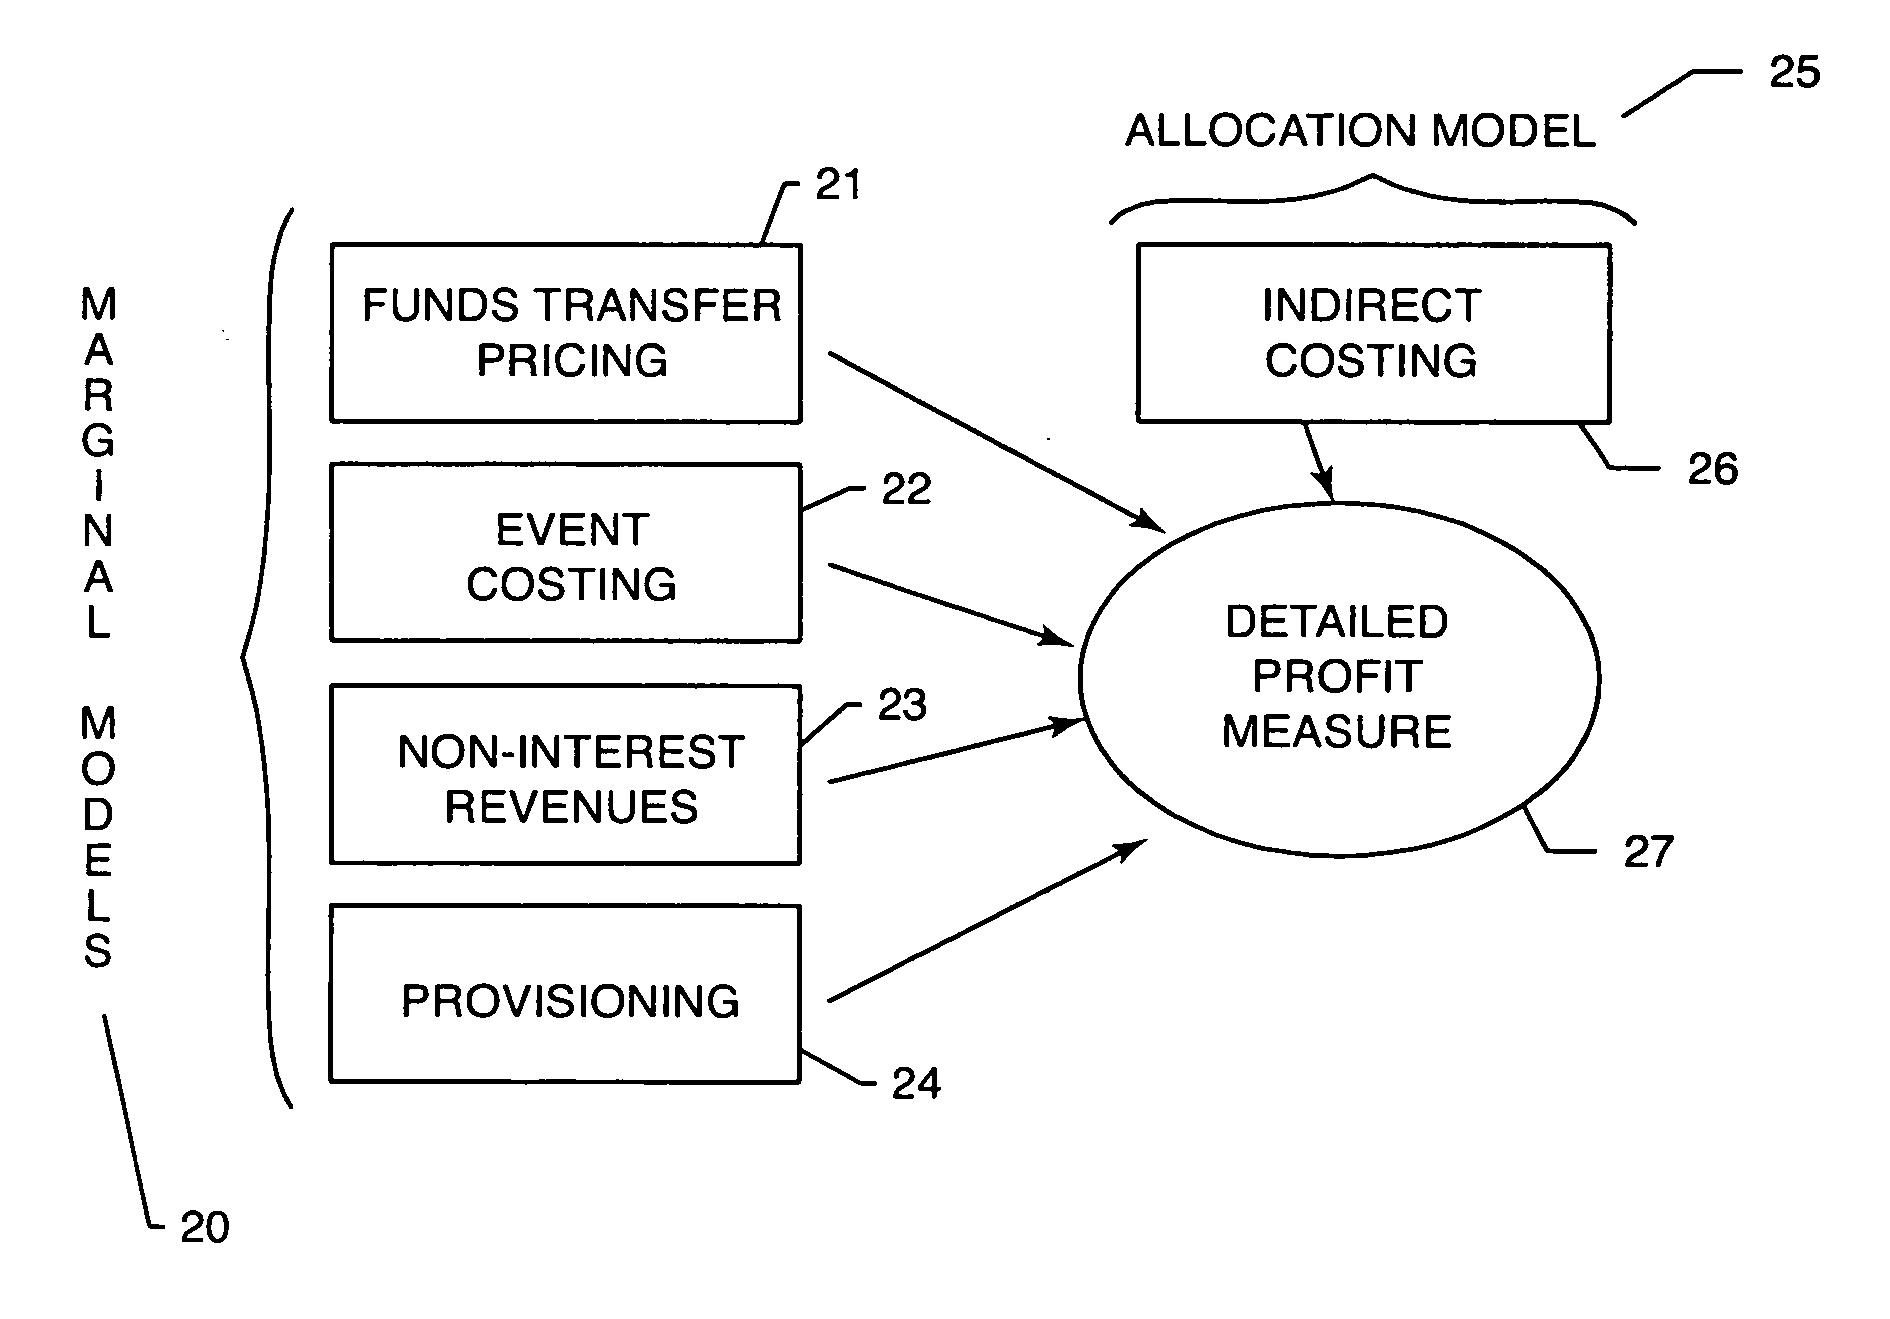 Process for determining object level profitability